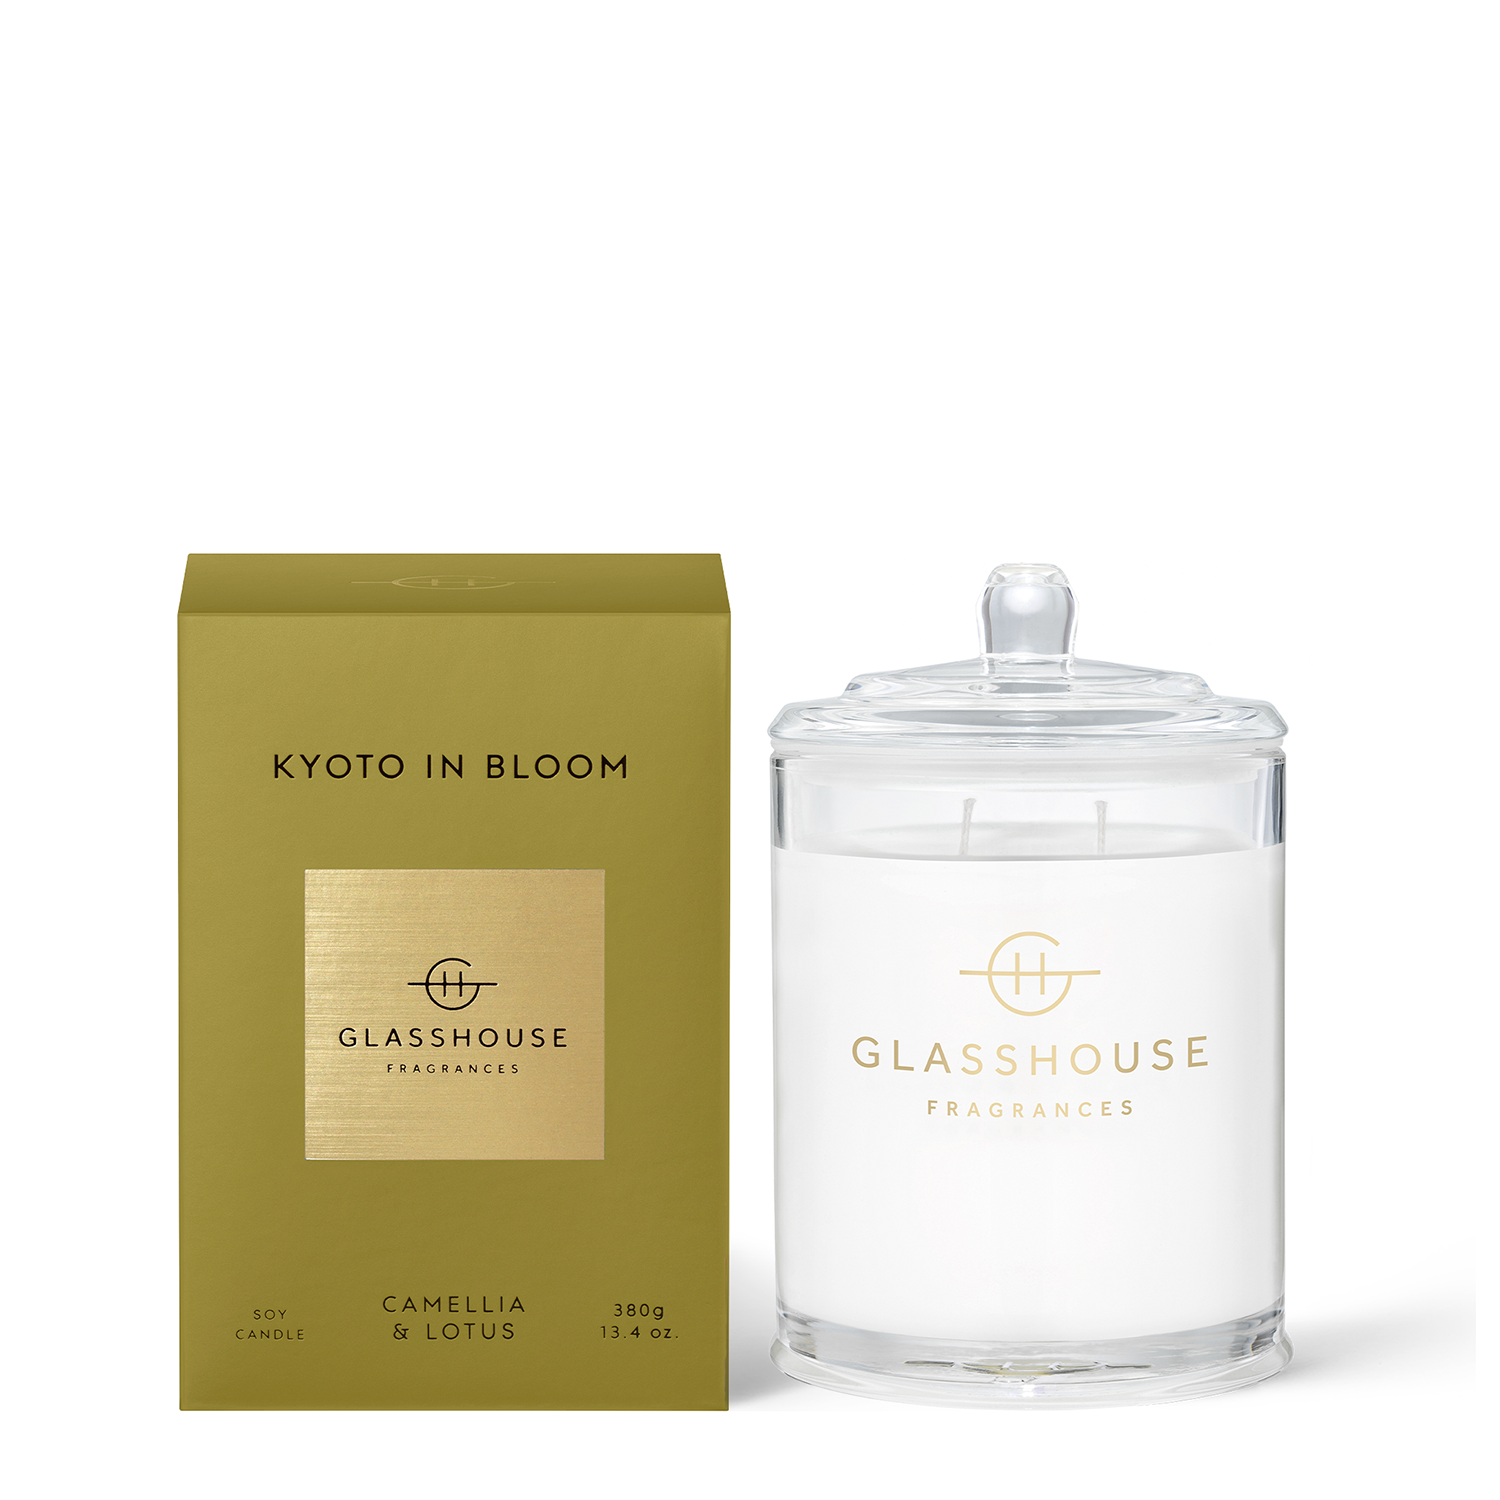 Glasshouse Fragrances - Kyoto in Bloom Candle / 13 oz